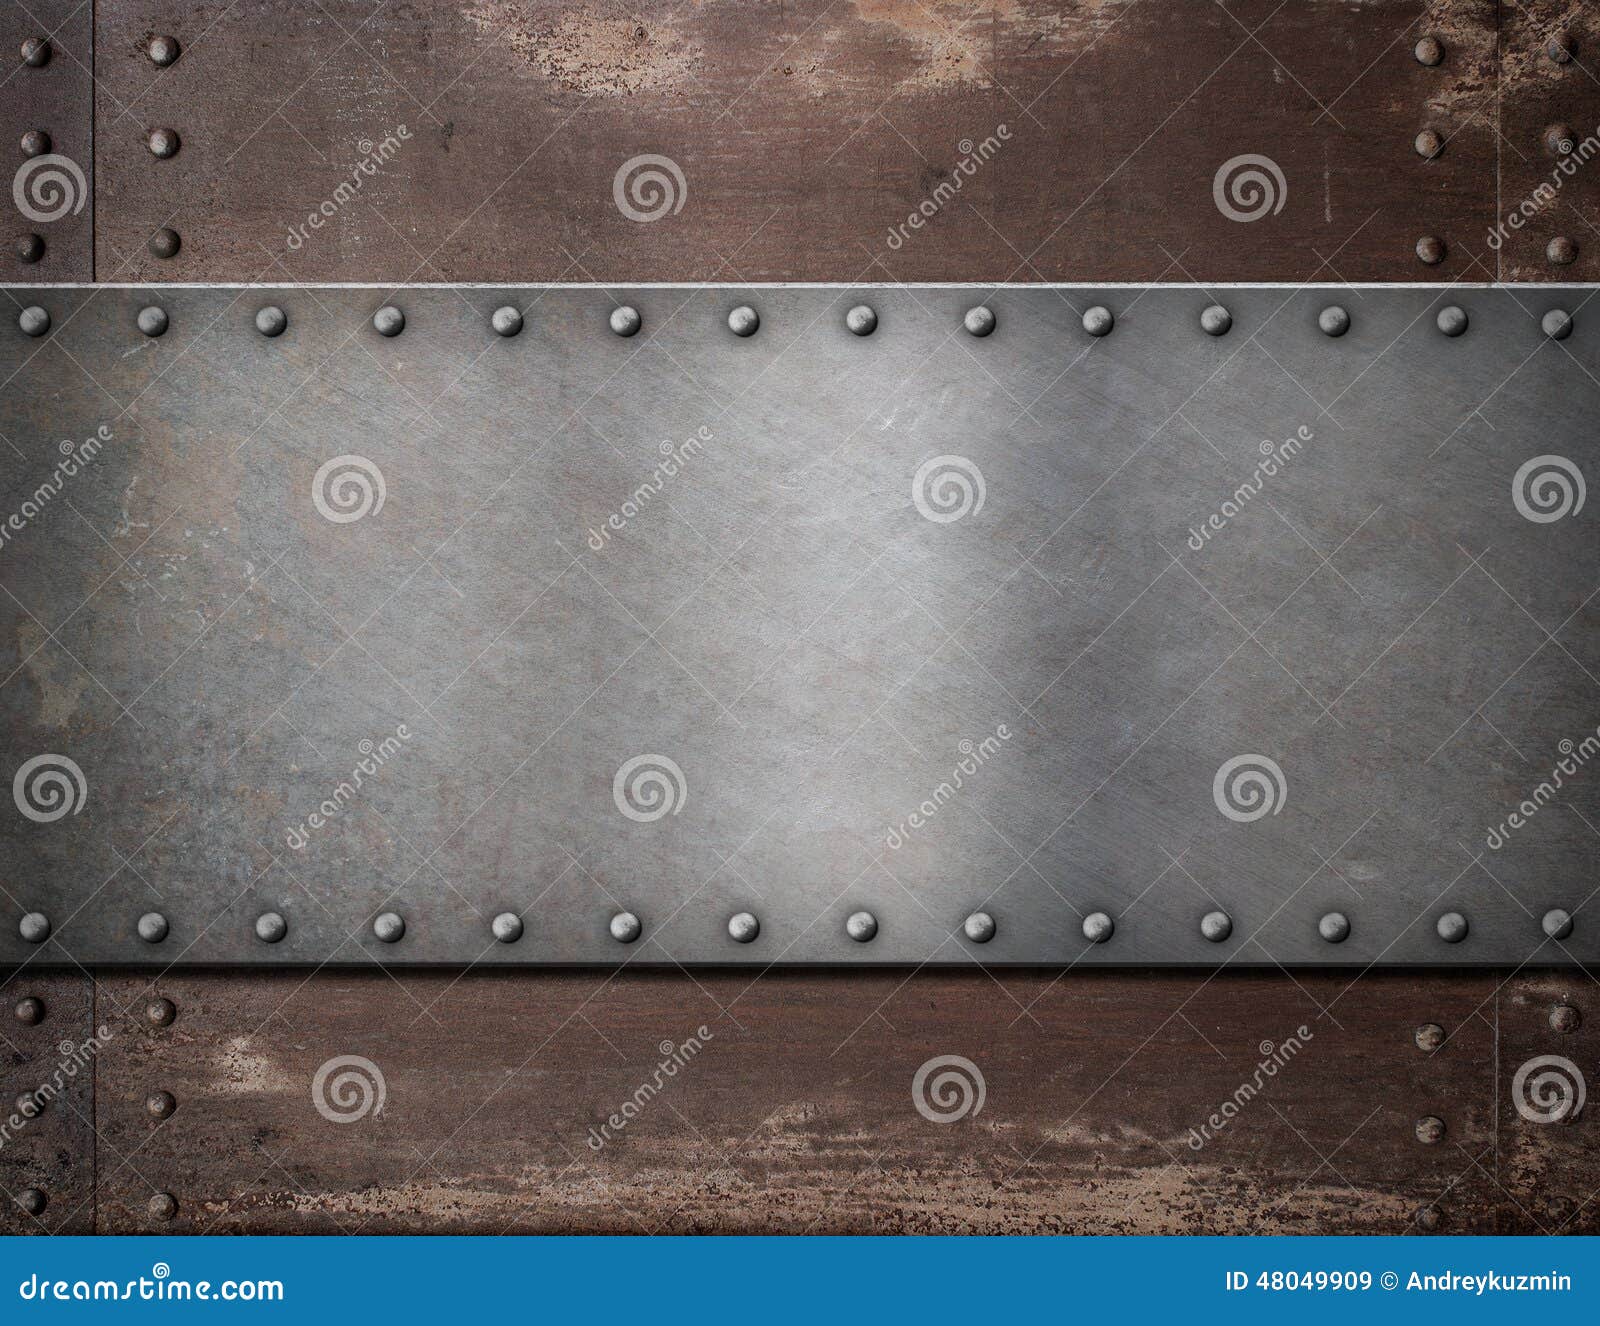 metal plate with rivets over rustic steel